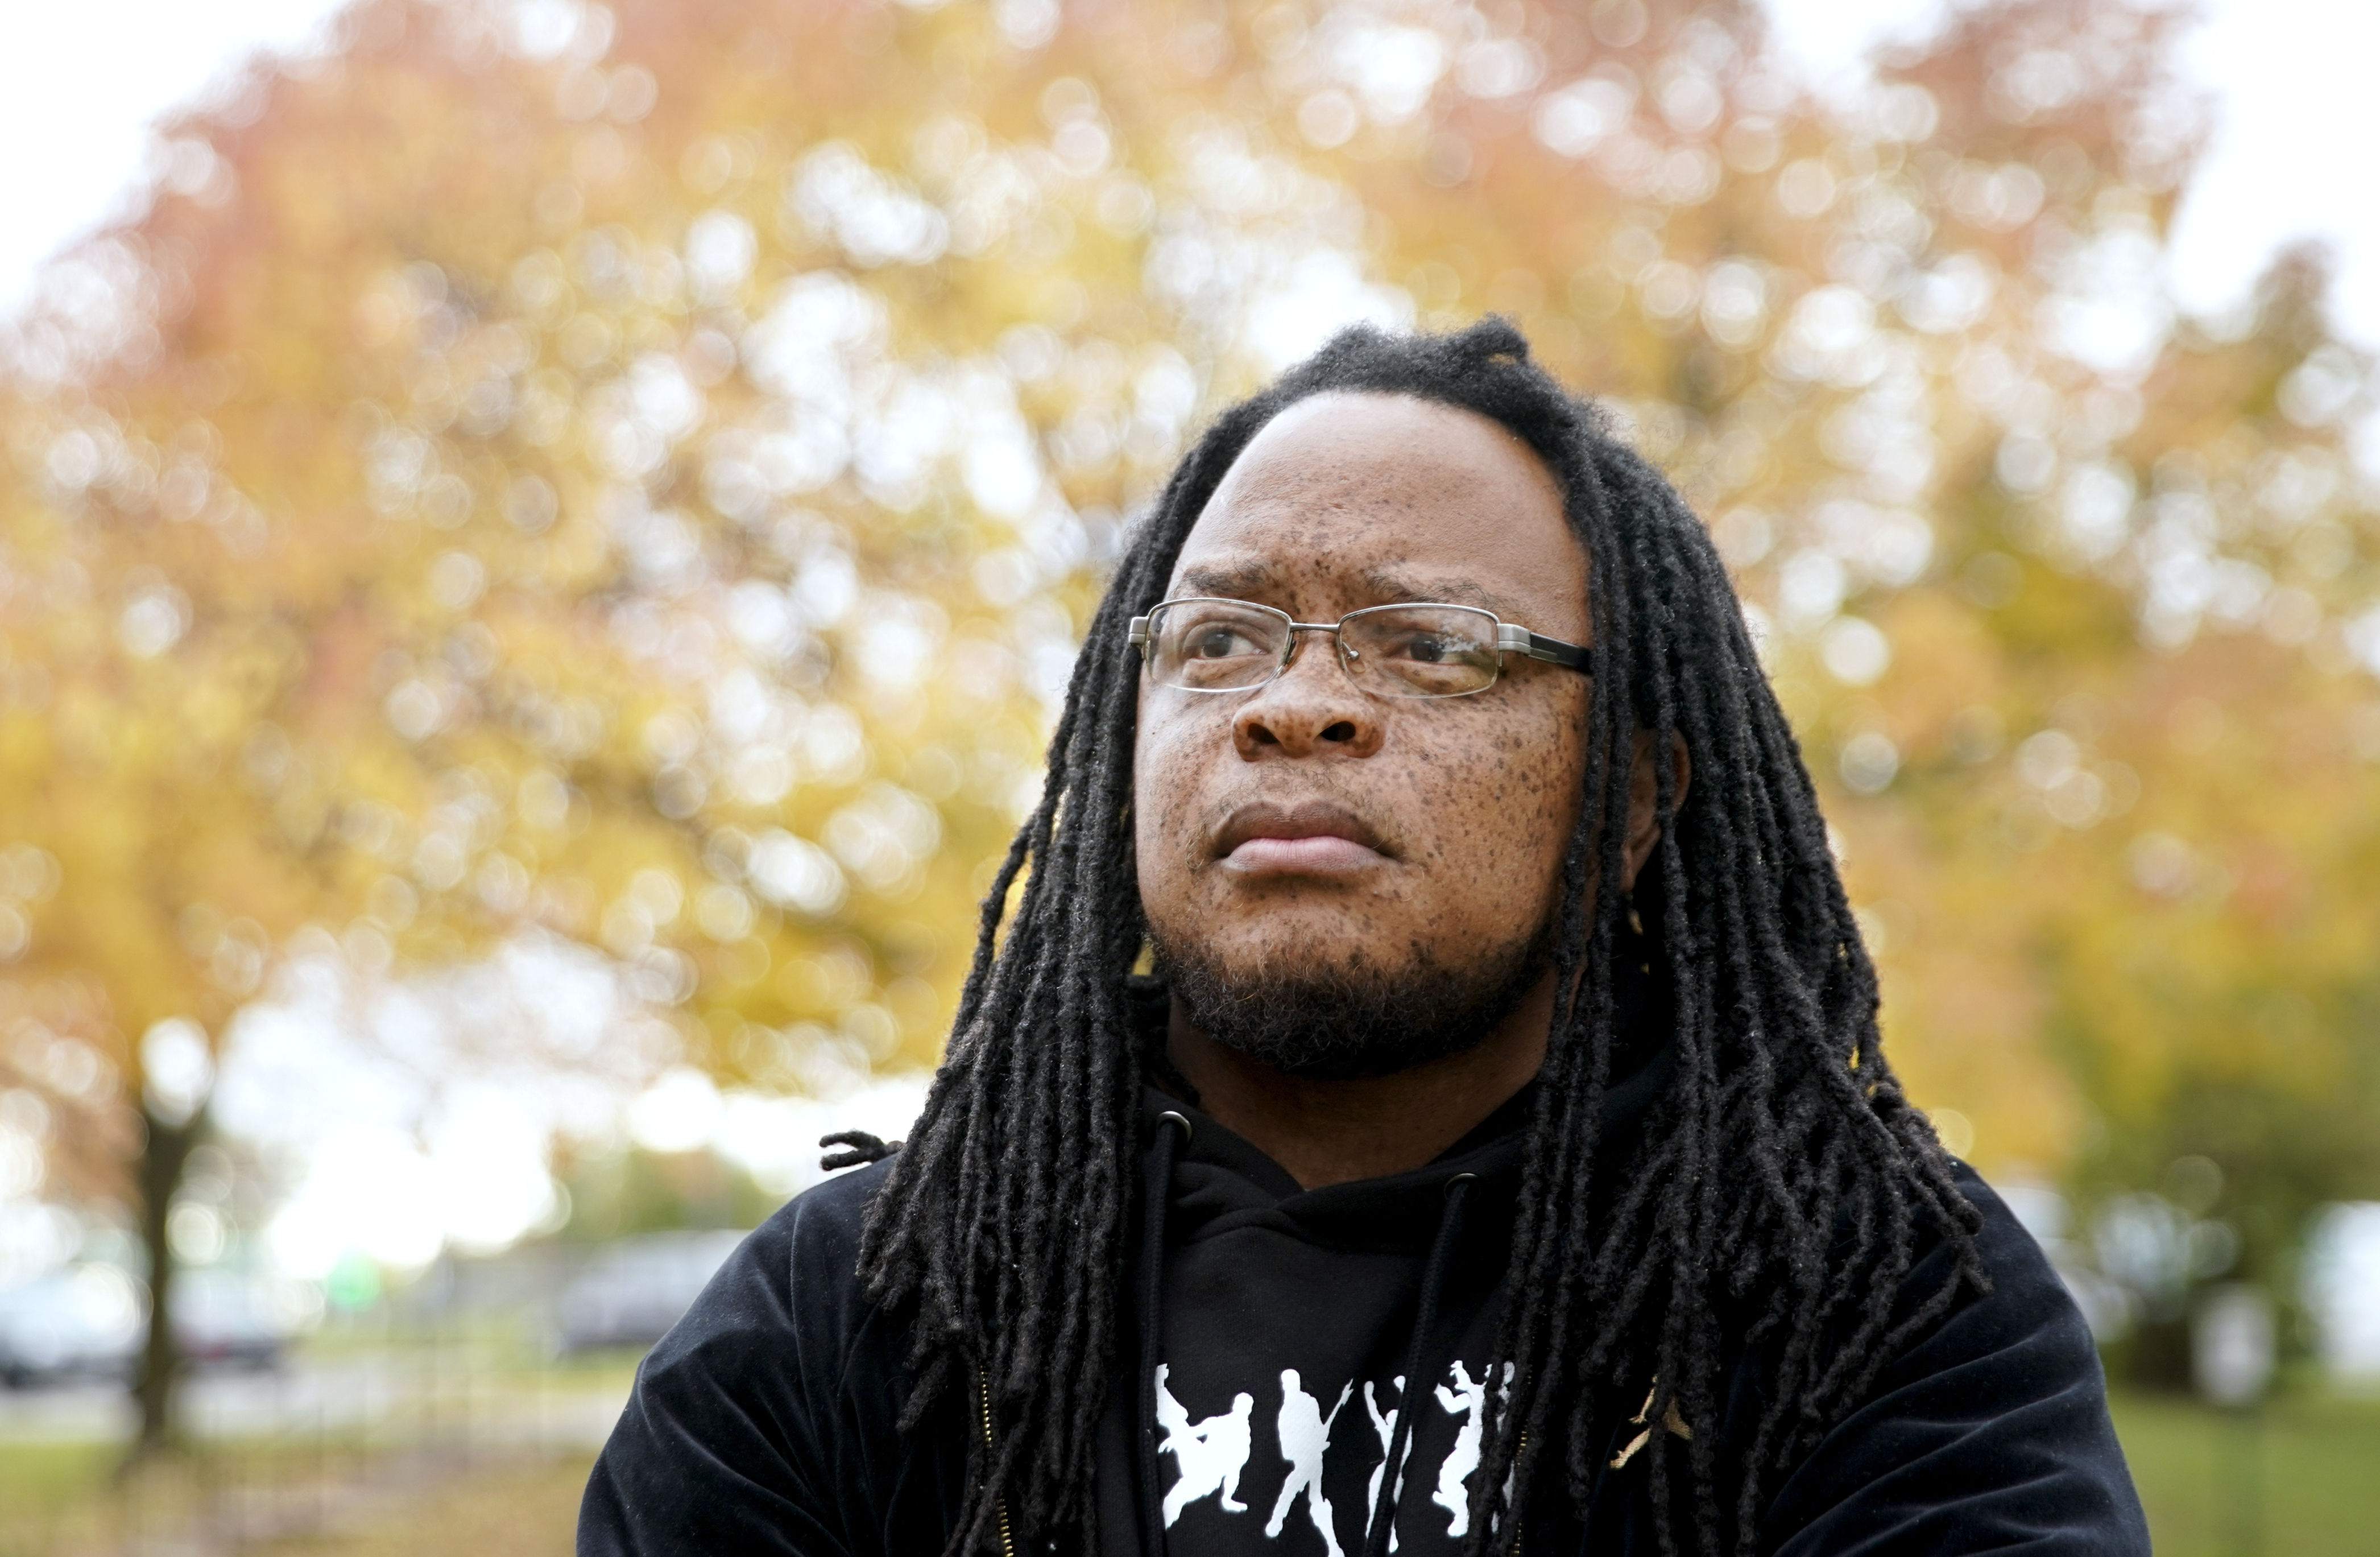 FILE - In this Oct. 17, 2019, file photo, Marlon Anderson poses for a photo in Madison, Wis. A Wisconsin school district is rehiring Anderson, a security guard after he was fired last week for repeating a racial slur while telling a student not to use it, a union official said Monday, Oct. 21. (Steve Apps/Wisconsin State Journal via AP) (Steve Apps—AP)